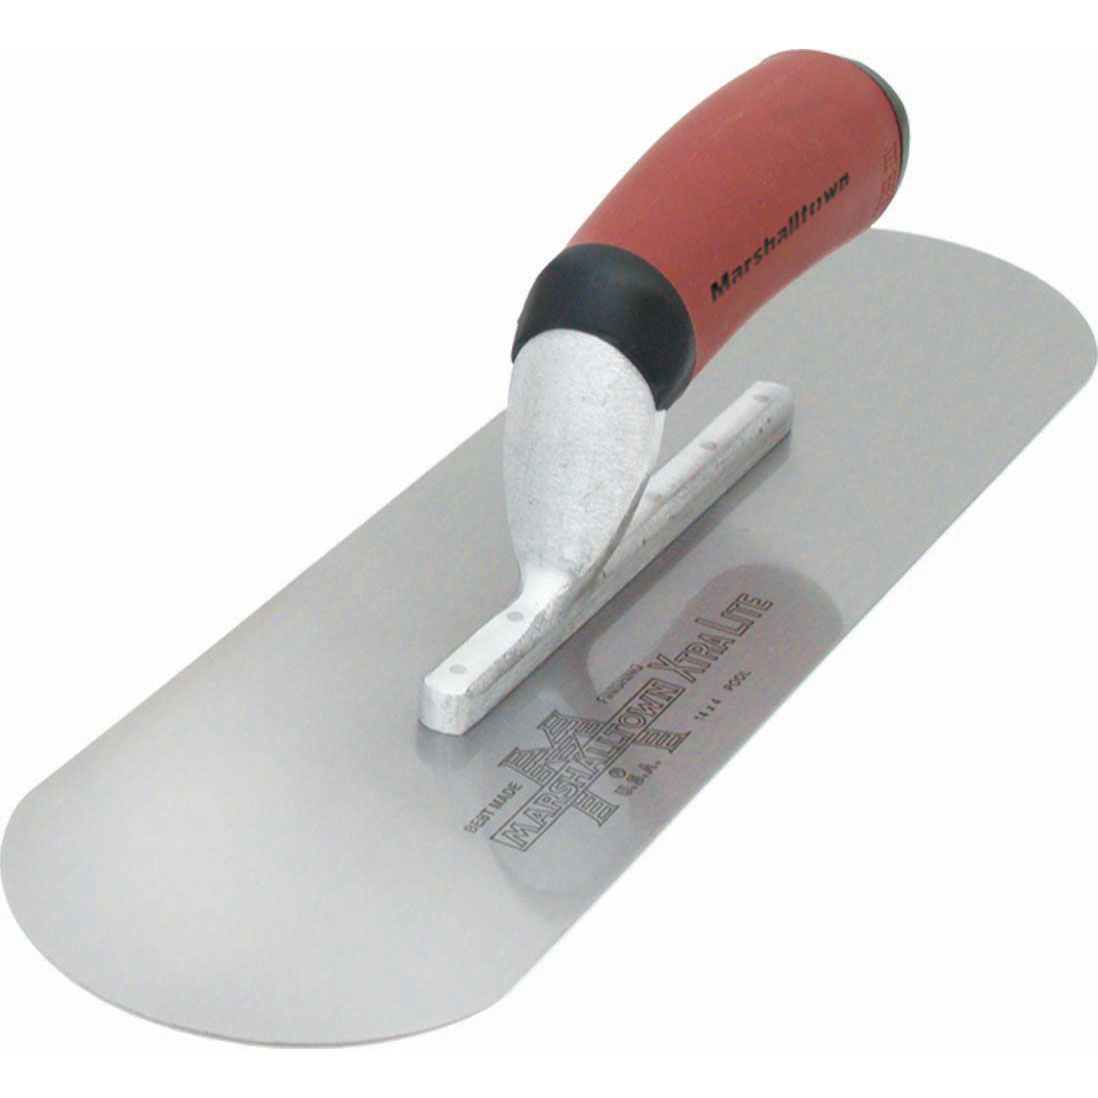 Marshalltown SP14SSD 14in x 4in Stainless Steel Pool Trowel with DuraSoft Handle SP14SSD